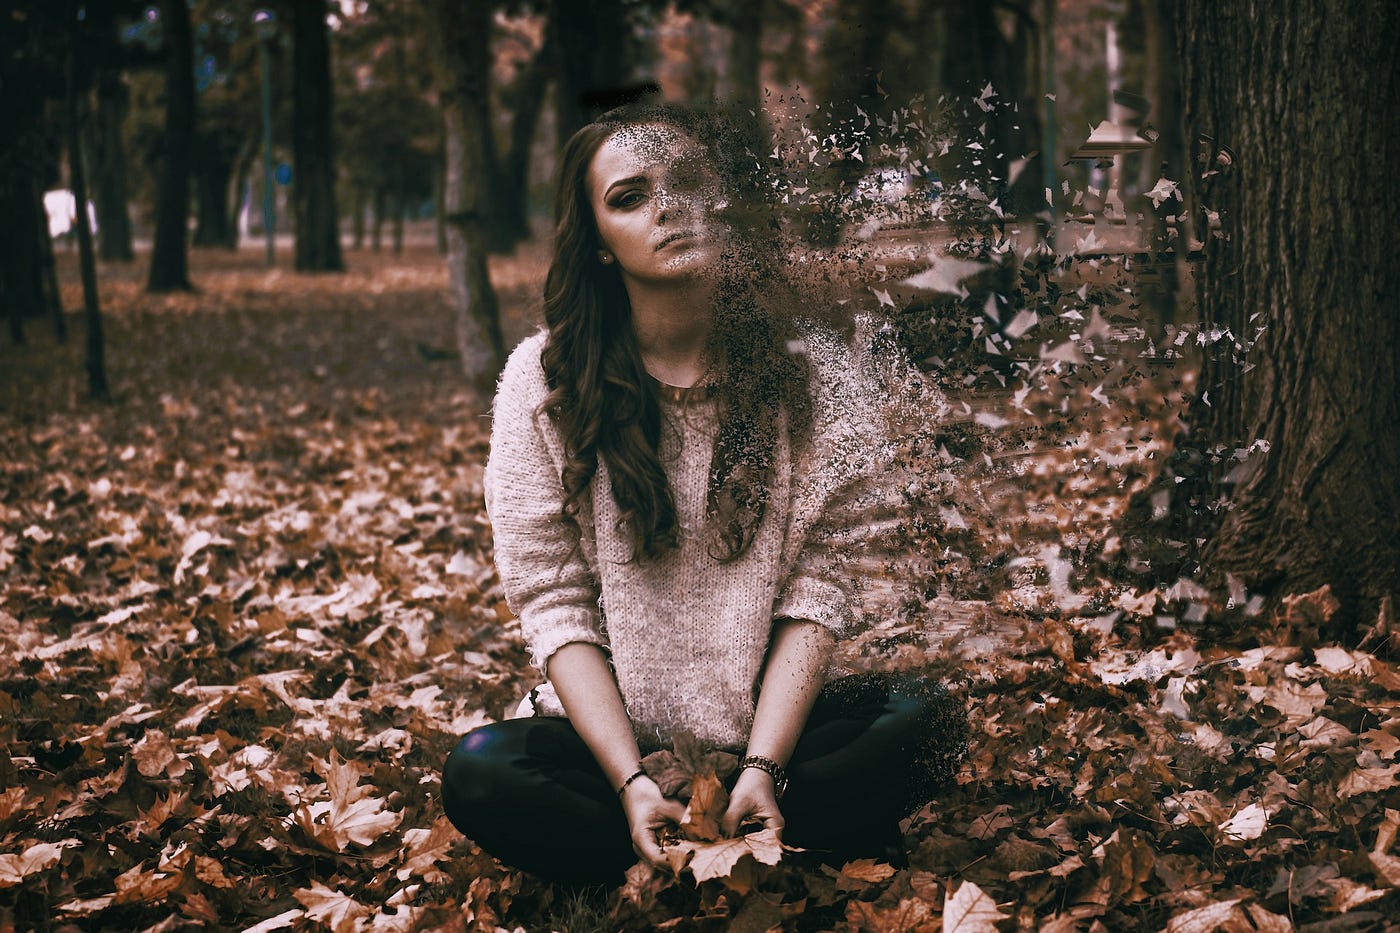 Sad girl sitting on a pile of leaves in the woods